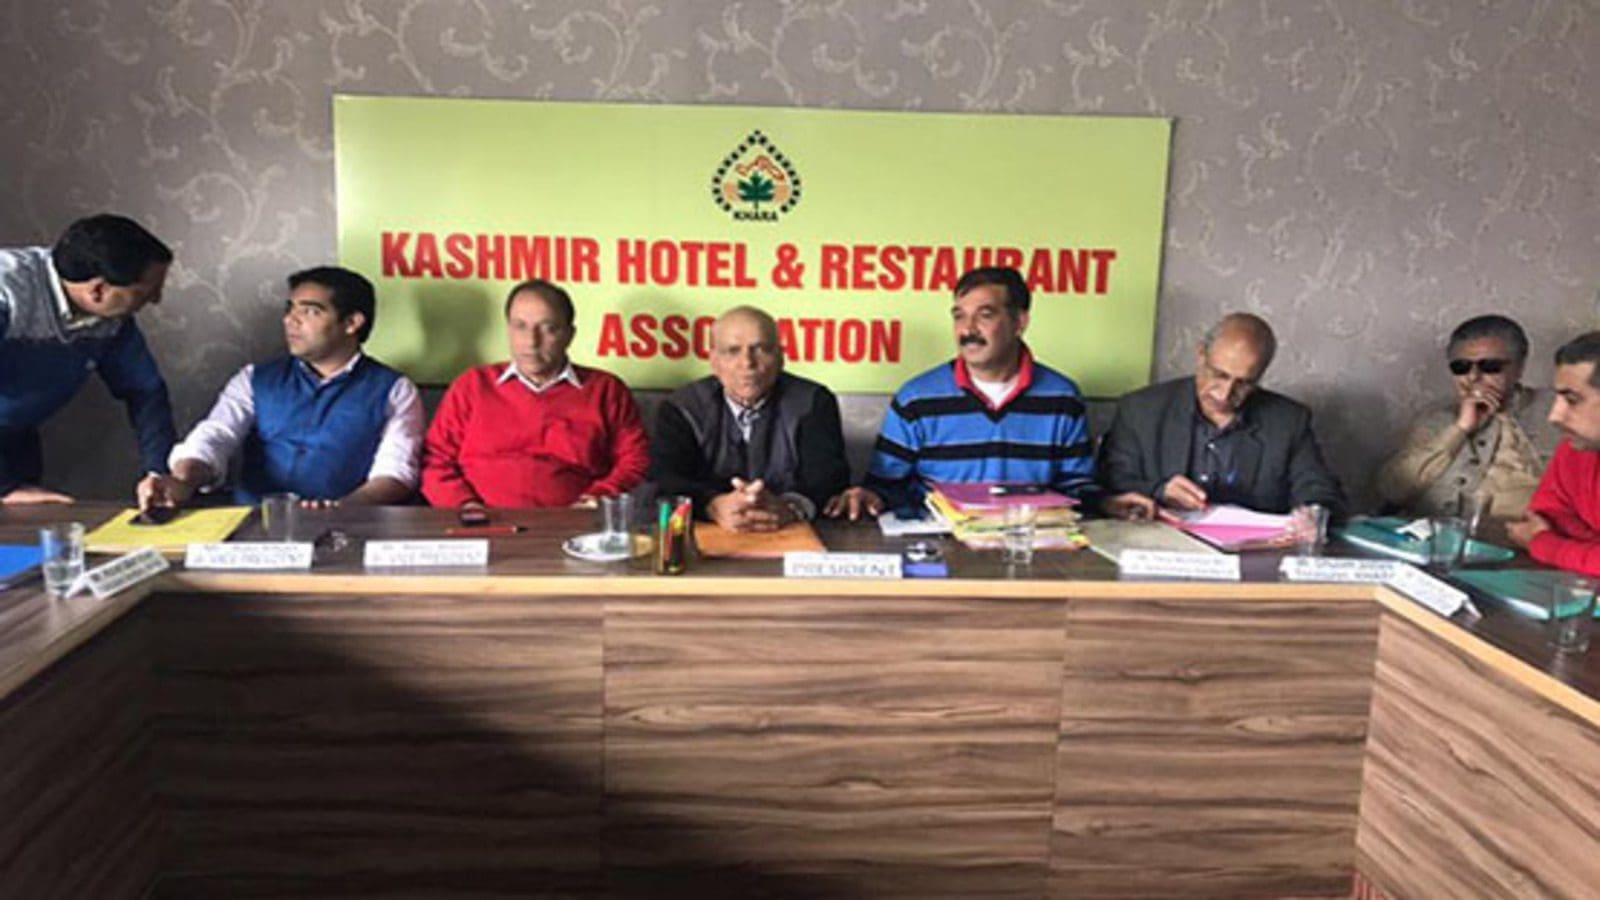 Hotel & Restaurant Associations conduct food safety workshop for food business operators